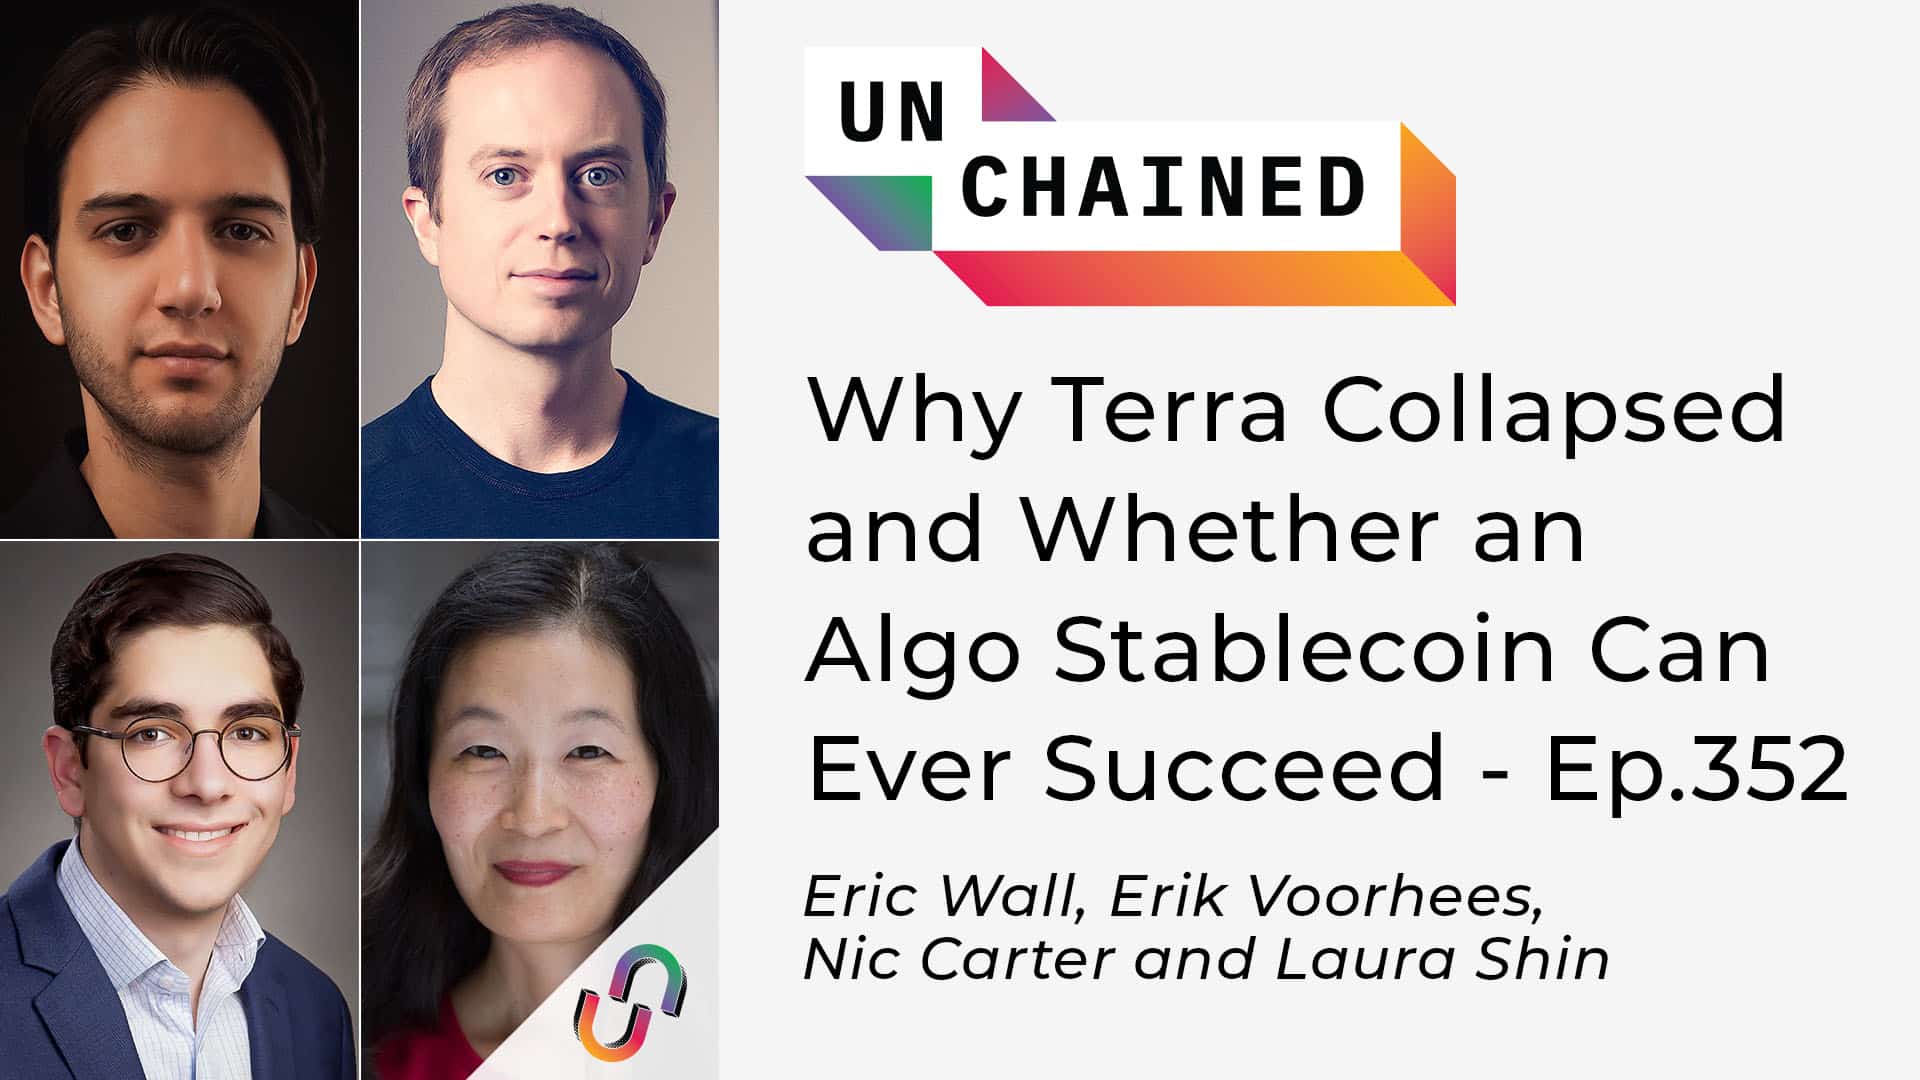 Unchained - Ep.352 - Why Terra Collapsed and Whether an Algo Stablecoin Can Ever Succeed